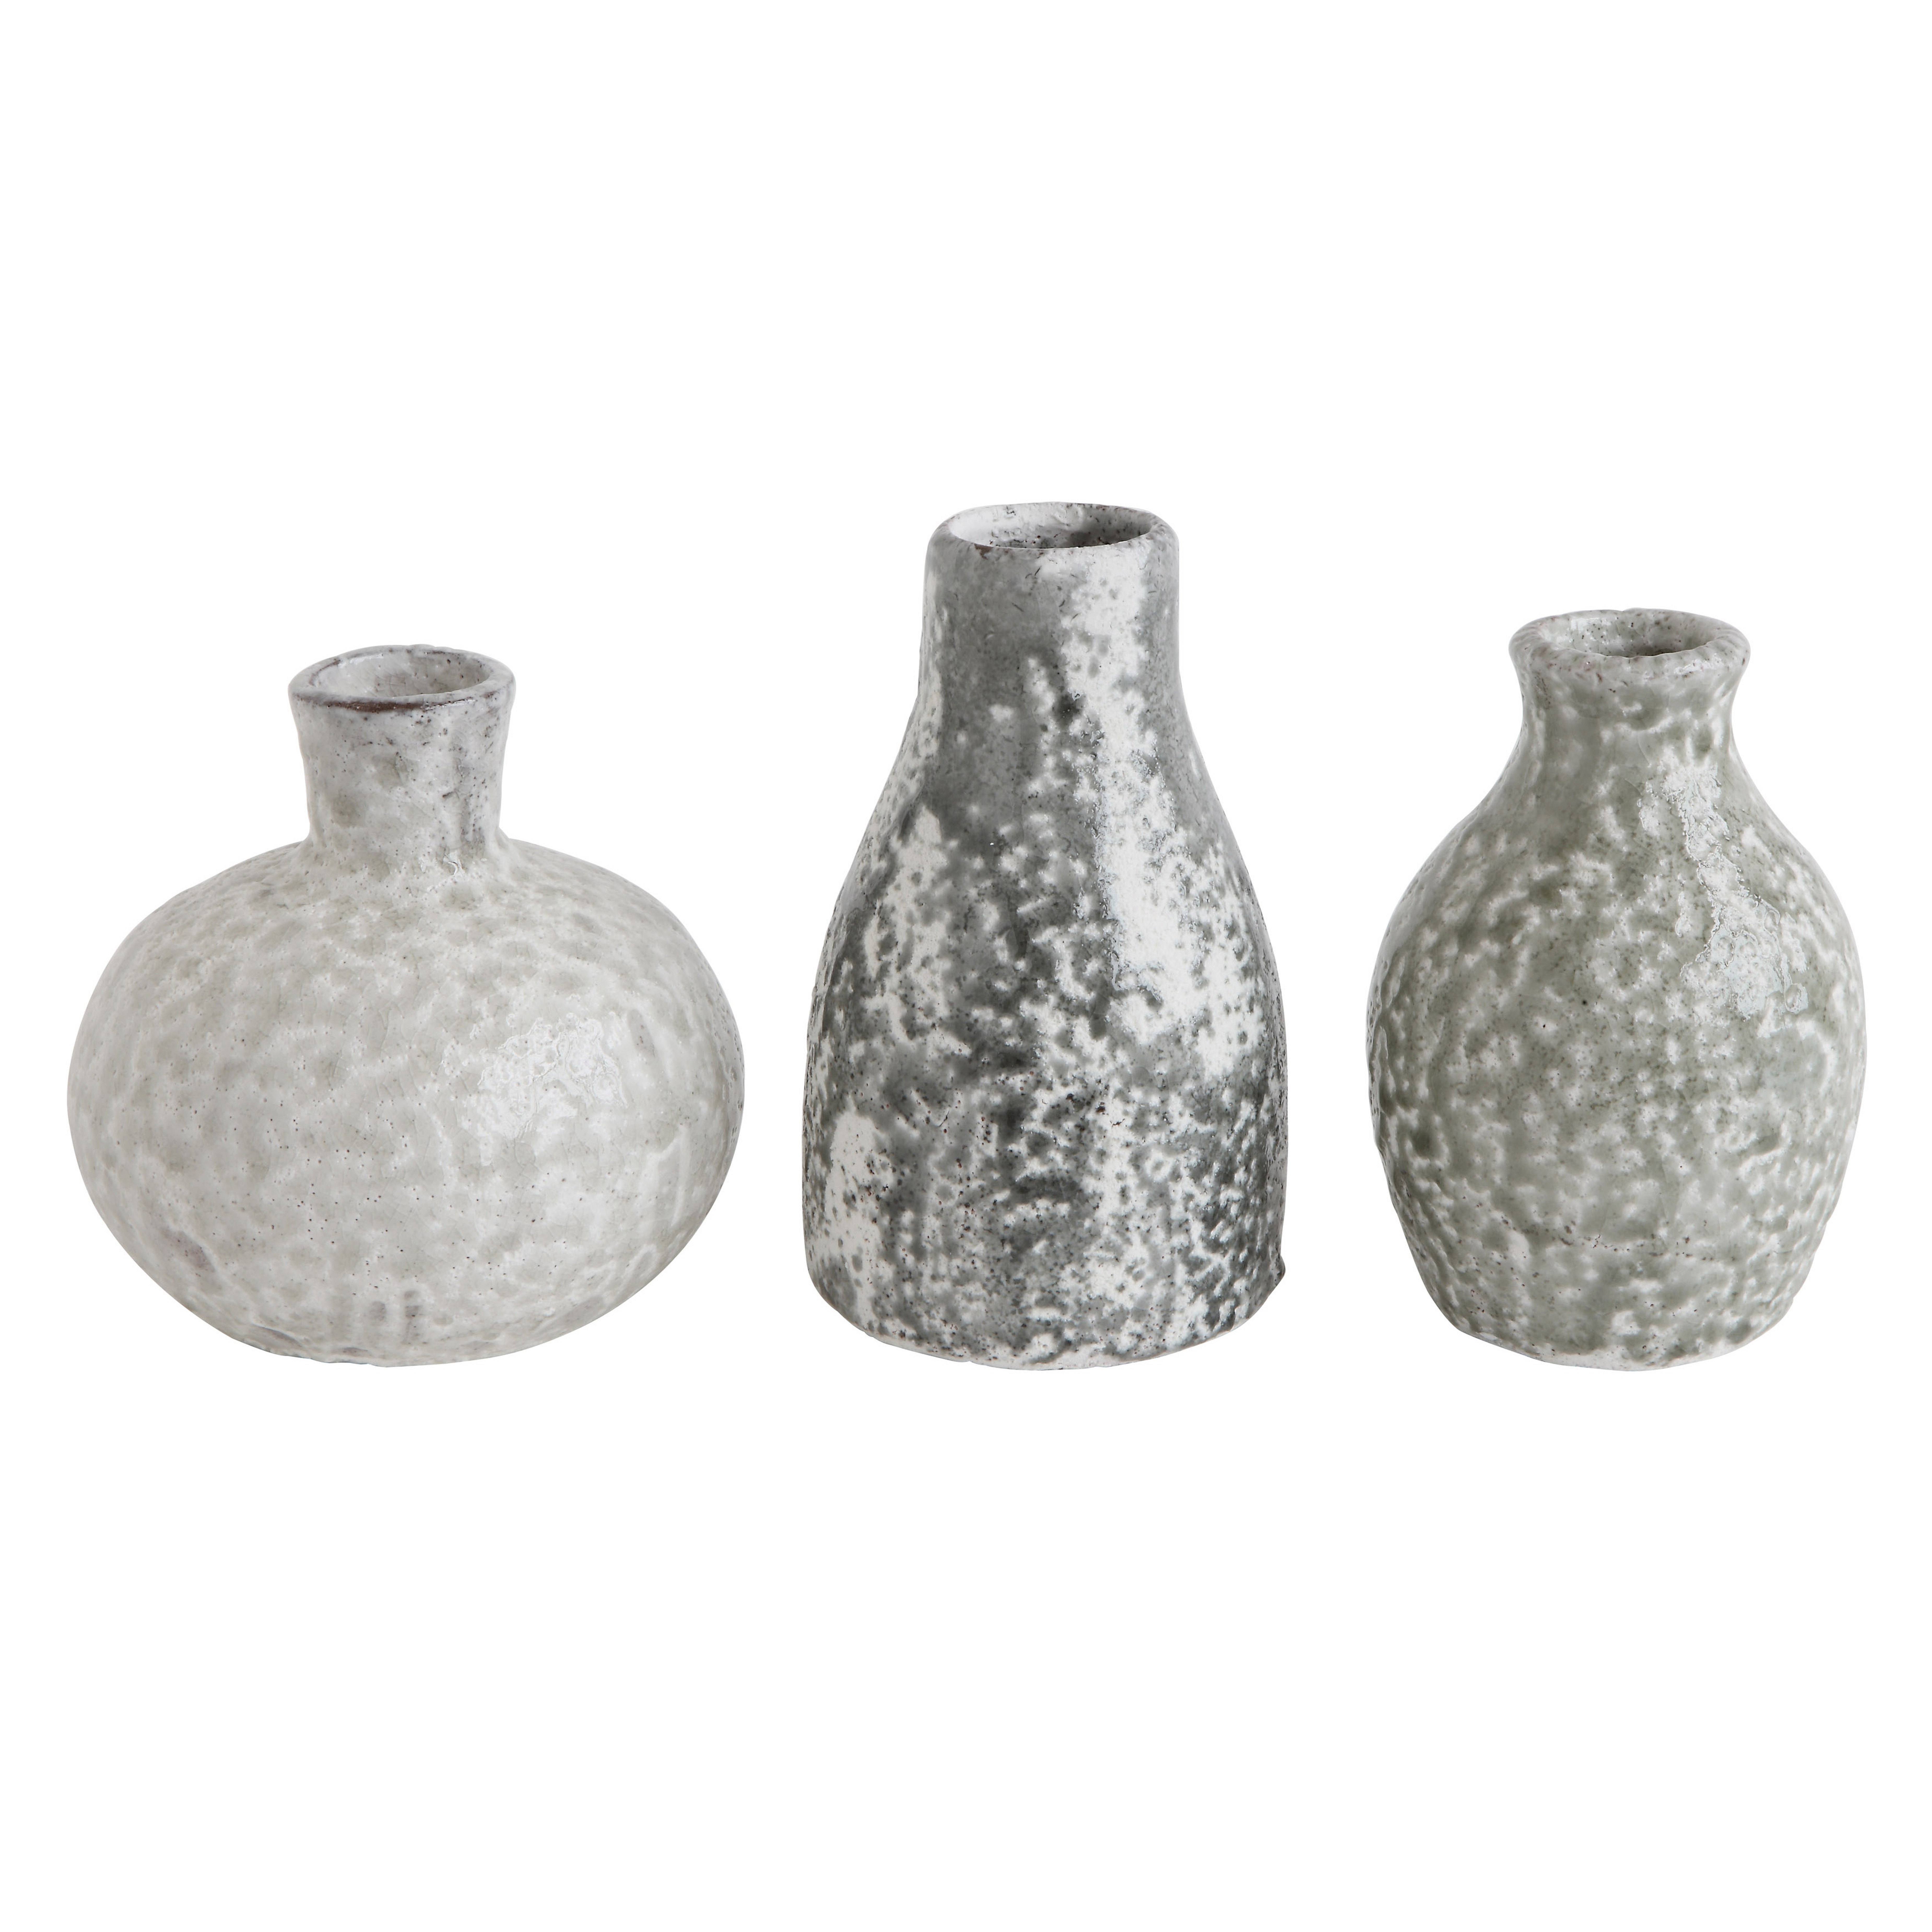 Distressed Terracotta Vases, Gray, Set of 3 - Nomad Home